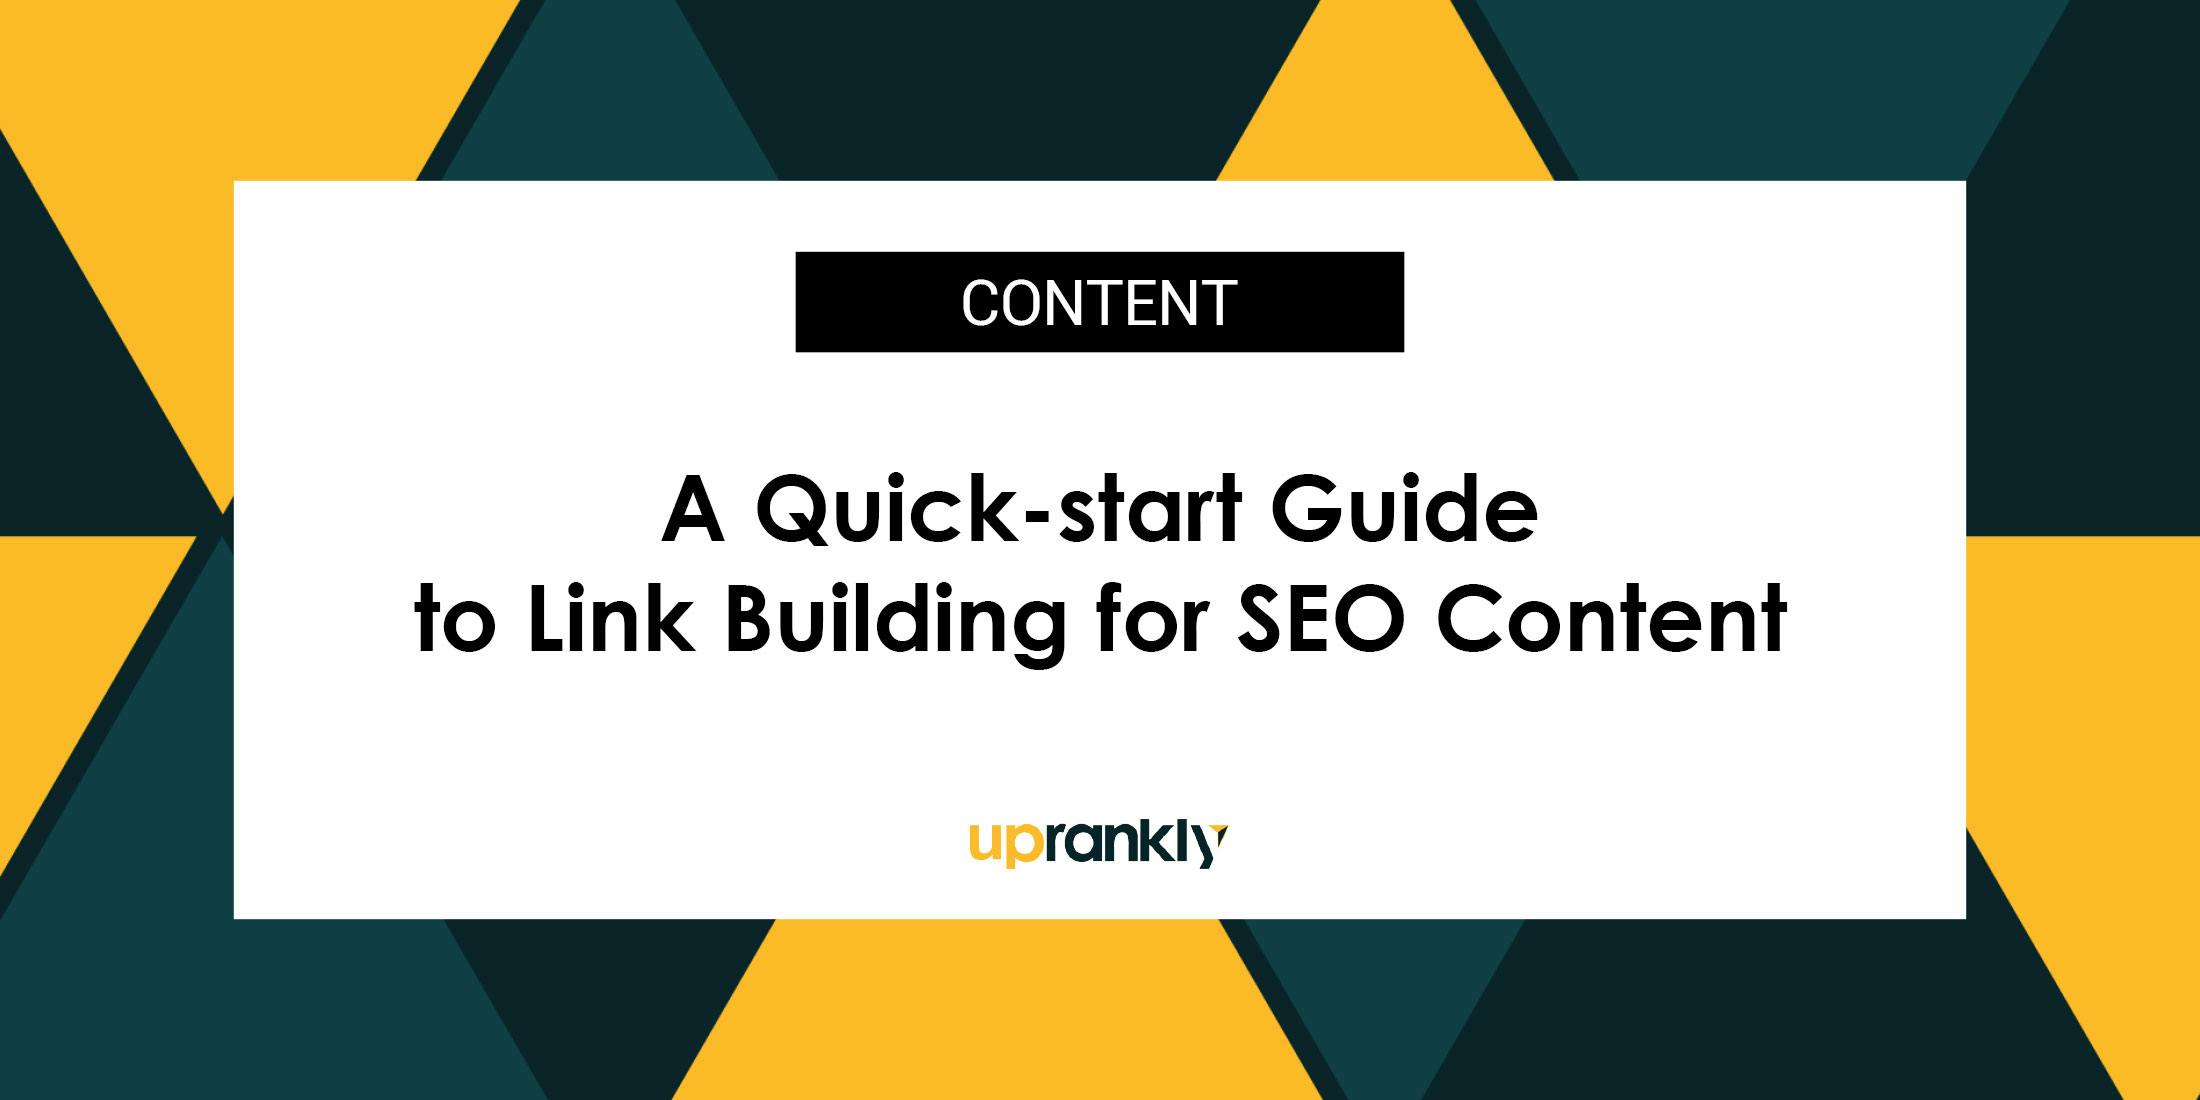 A Quick-Start Guide to Link Building for SEO Content